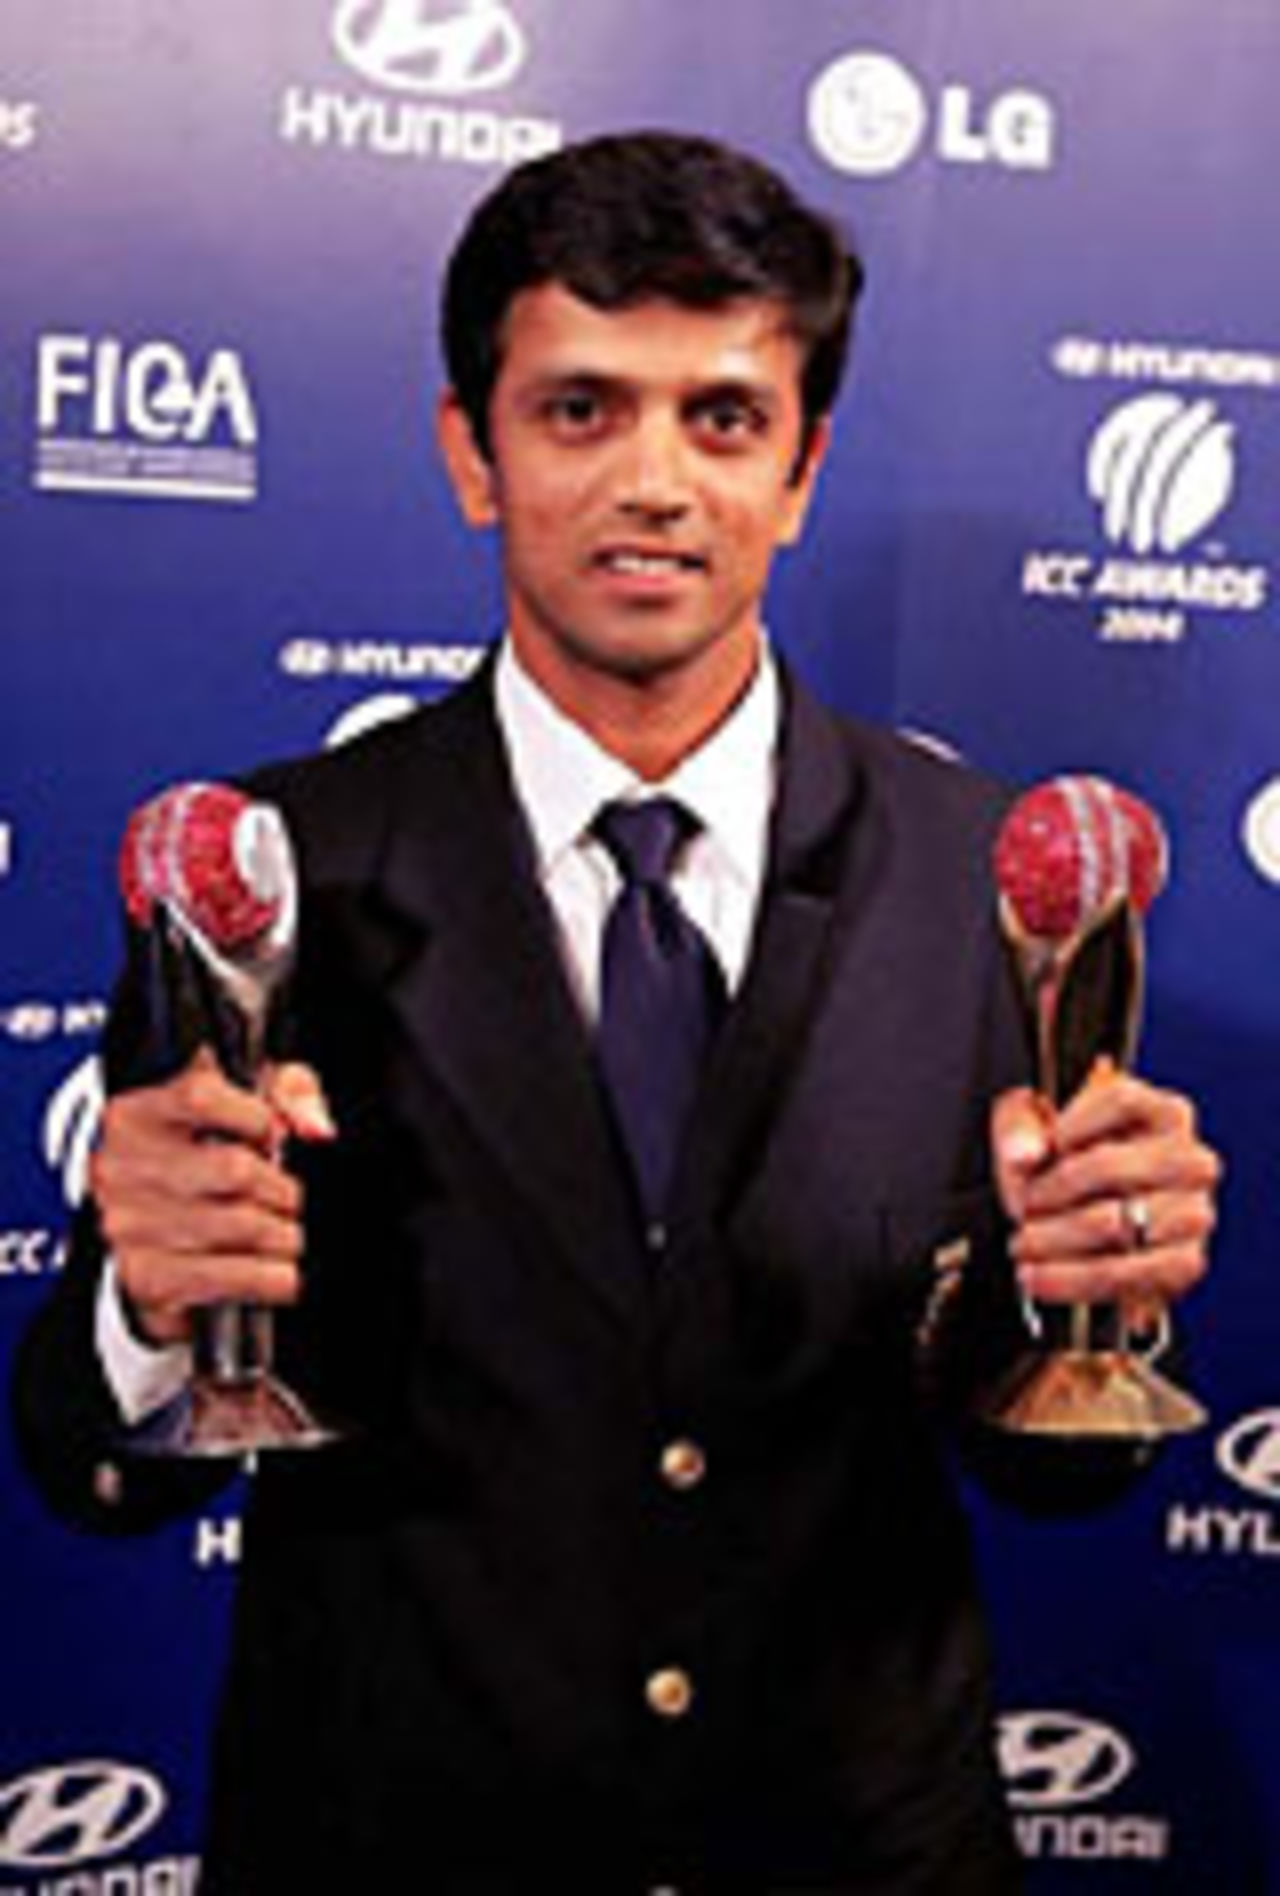 Rahul Dravid with the ICC's Test and Sir Garfield Sobers award trophies, London, September 7, 2004